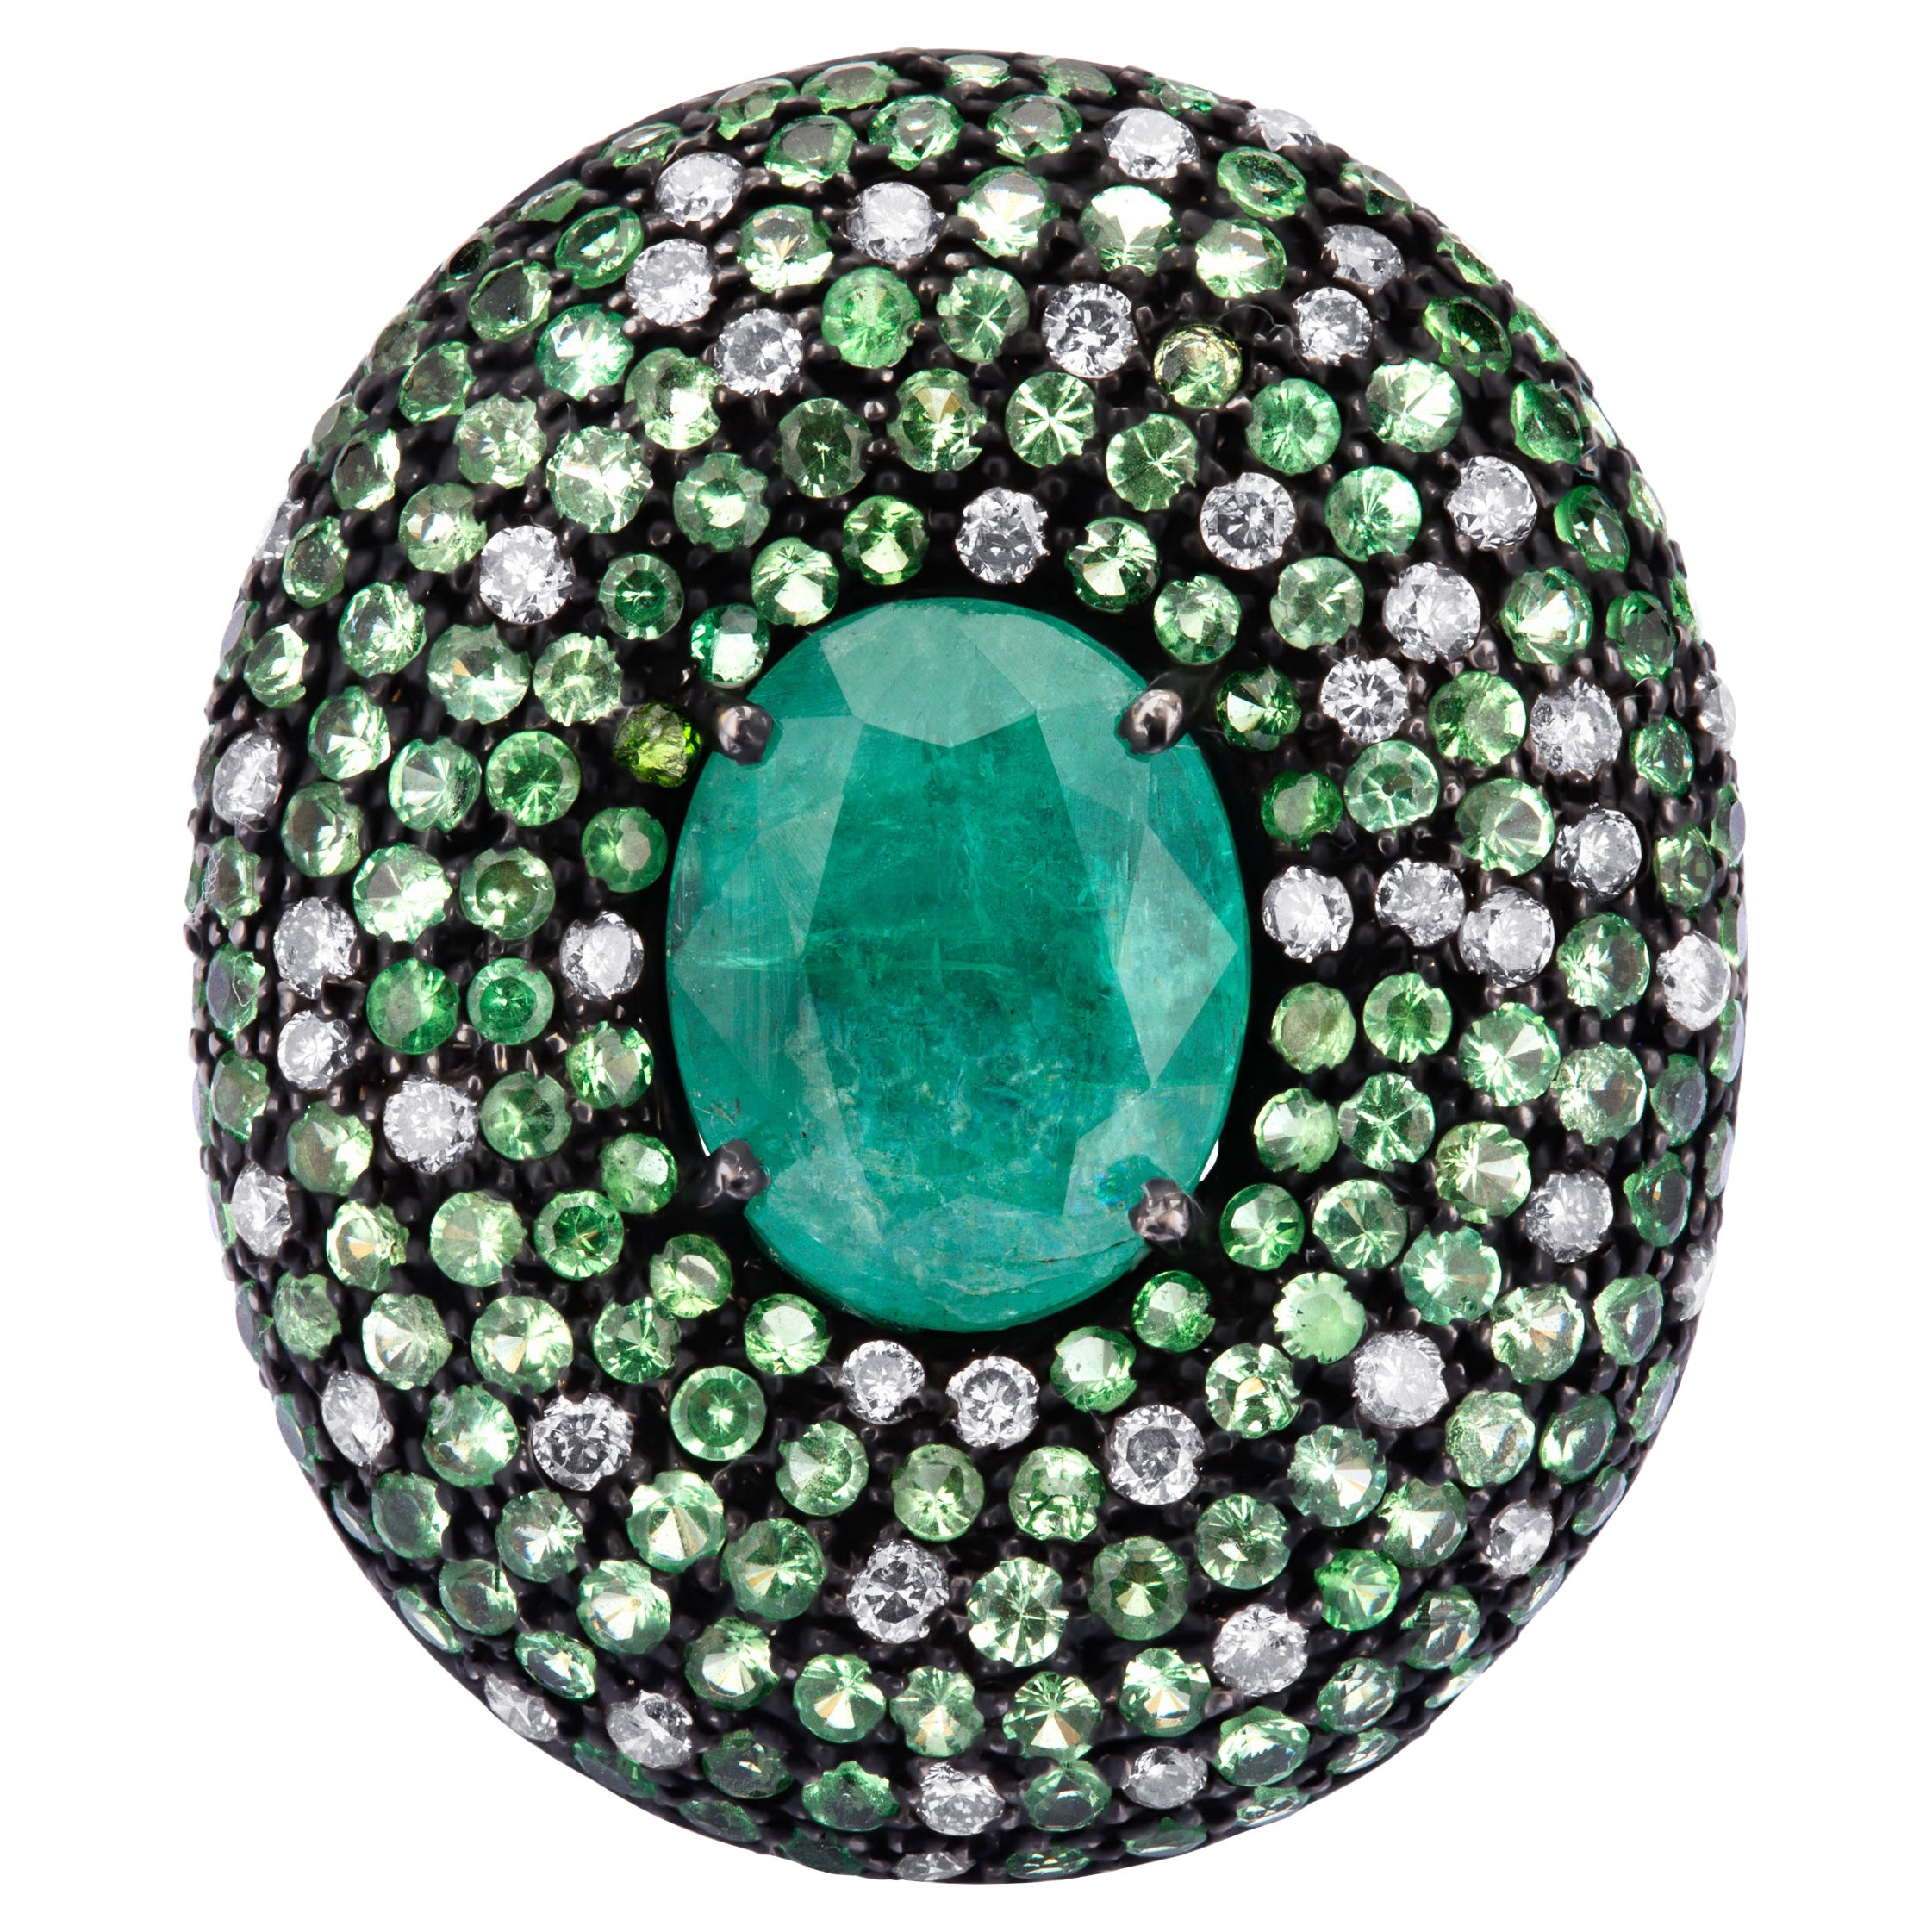 Victorian 5.7cttw Emerald, Tsavorite and Diamond Cluster Ring in 18k Gold